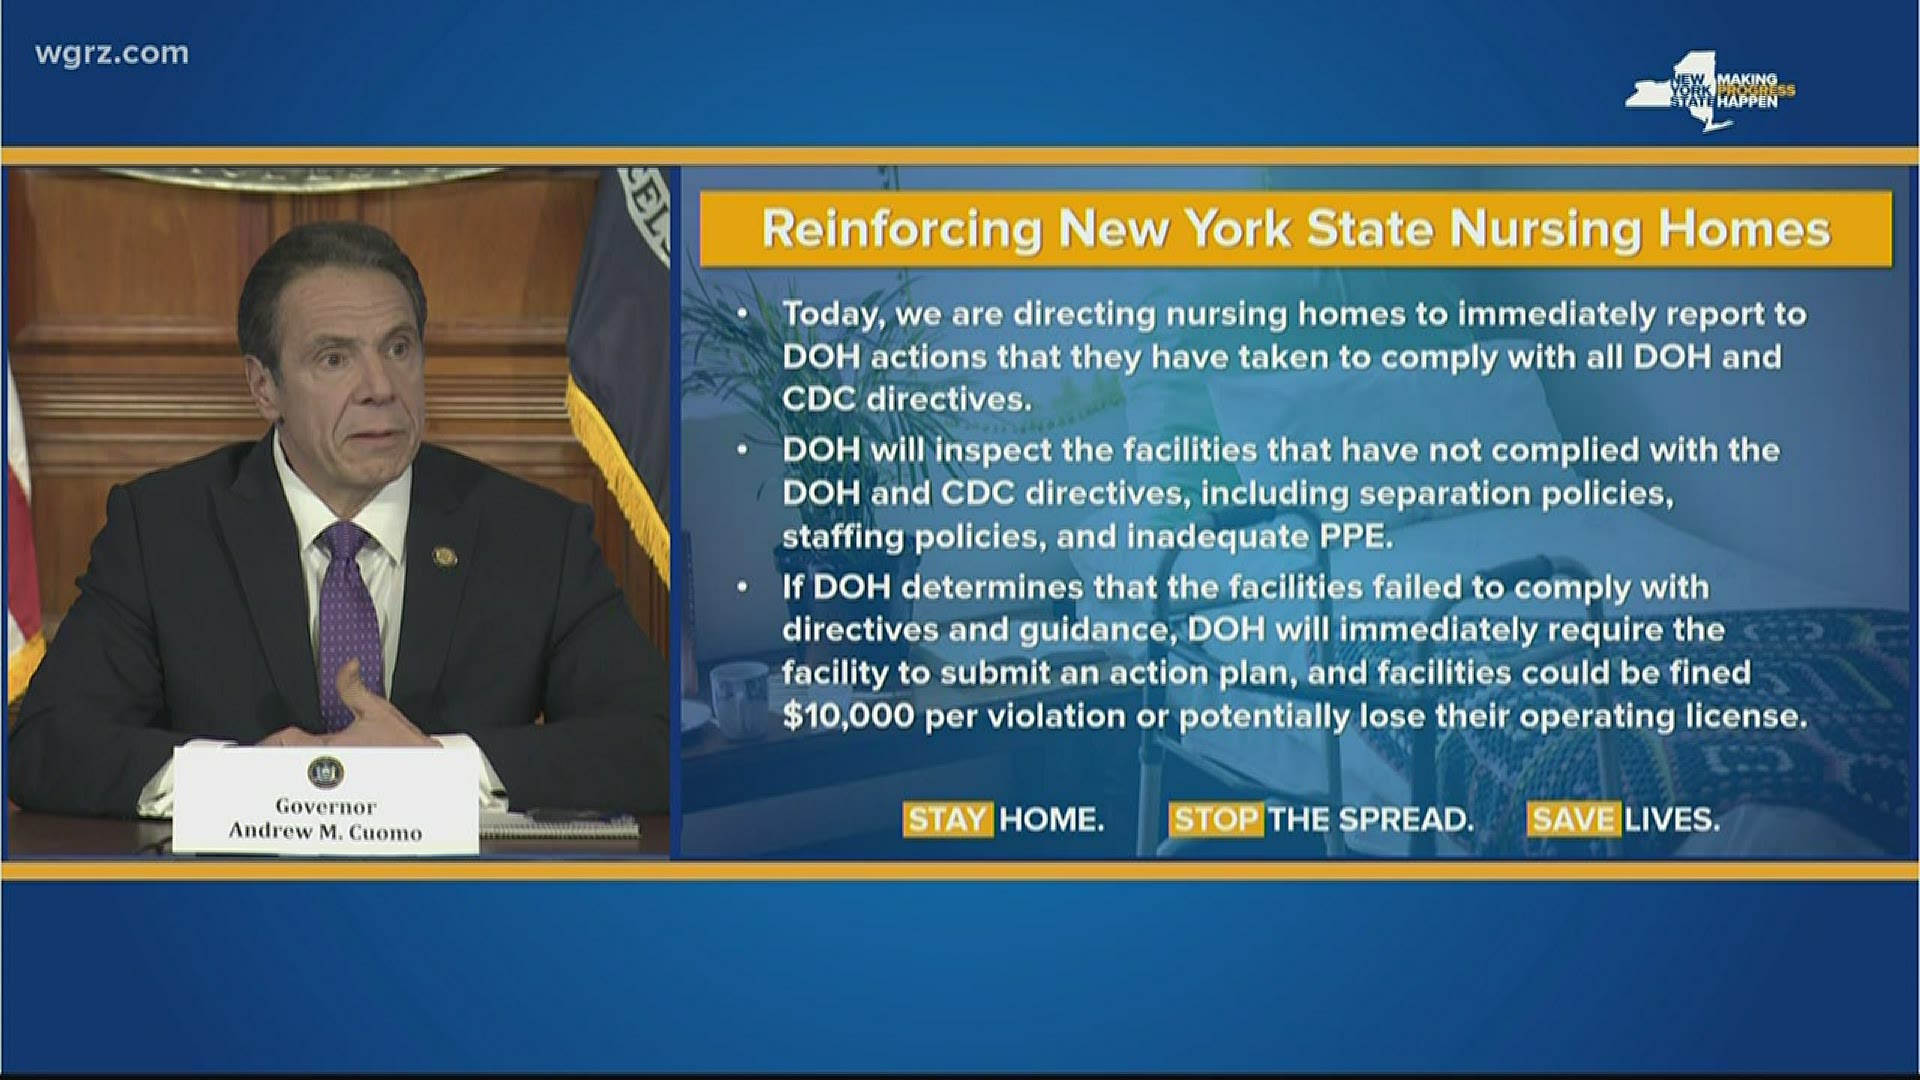 Gov. Cuomo: Nursing homes are our top priority; launches investigation with NYS DOH & AG's office